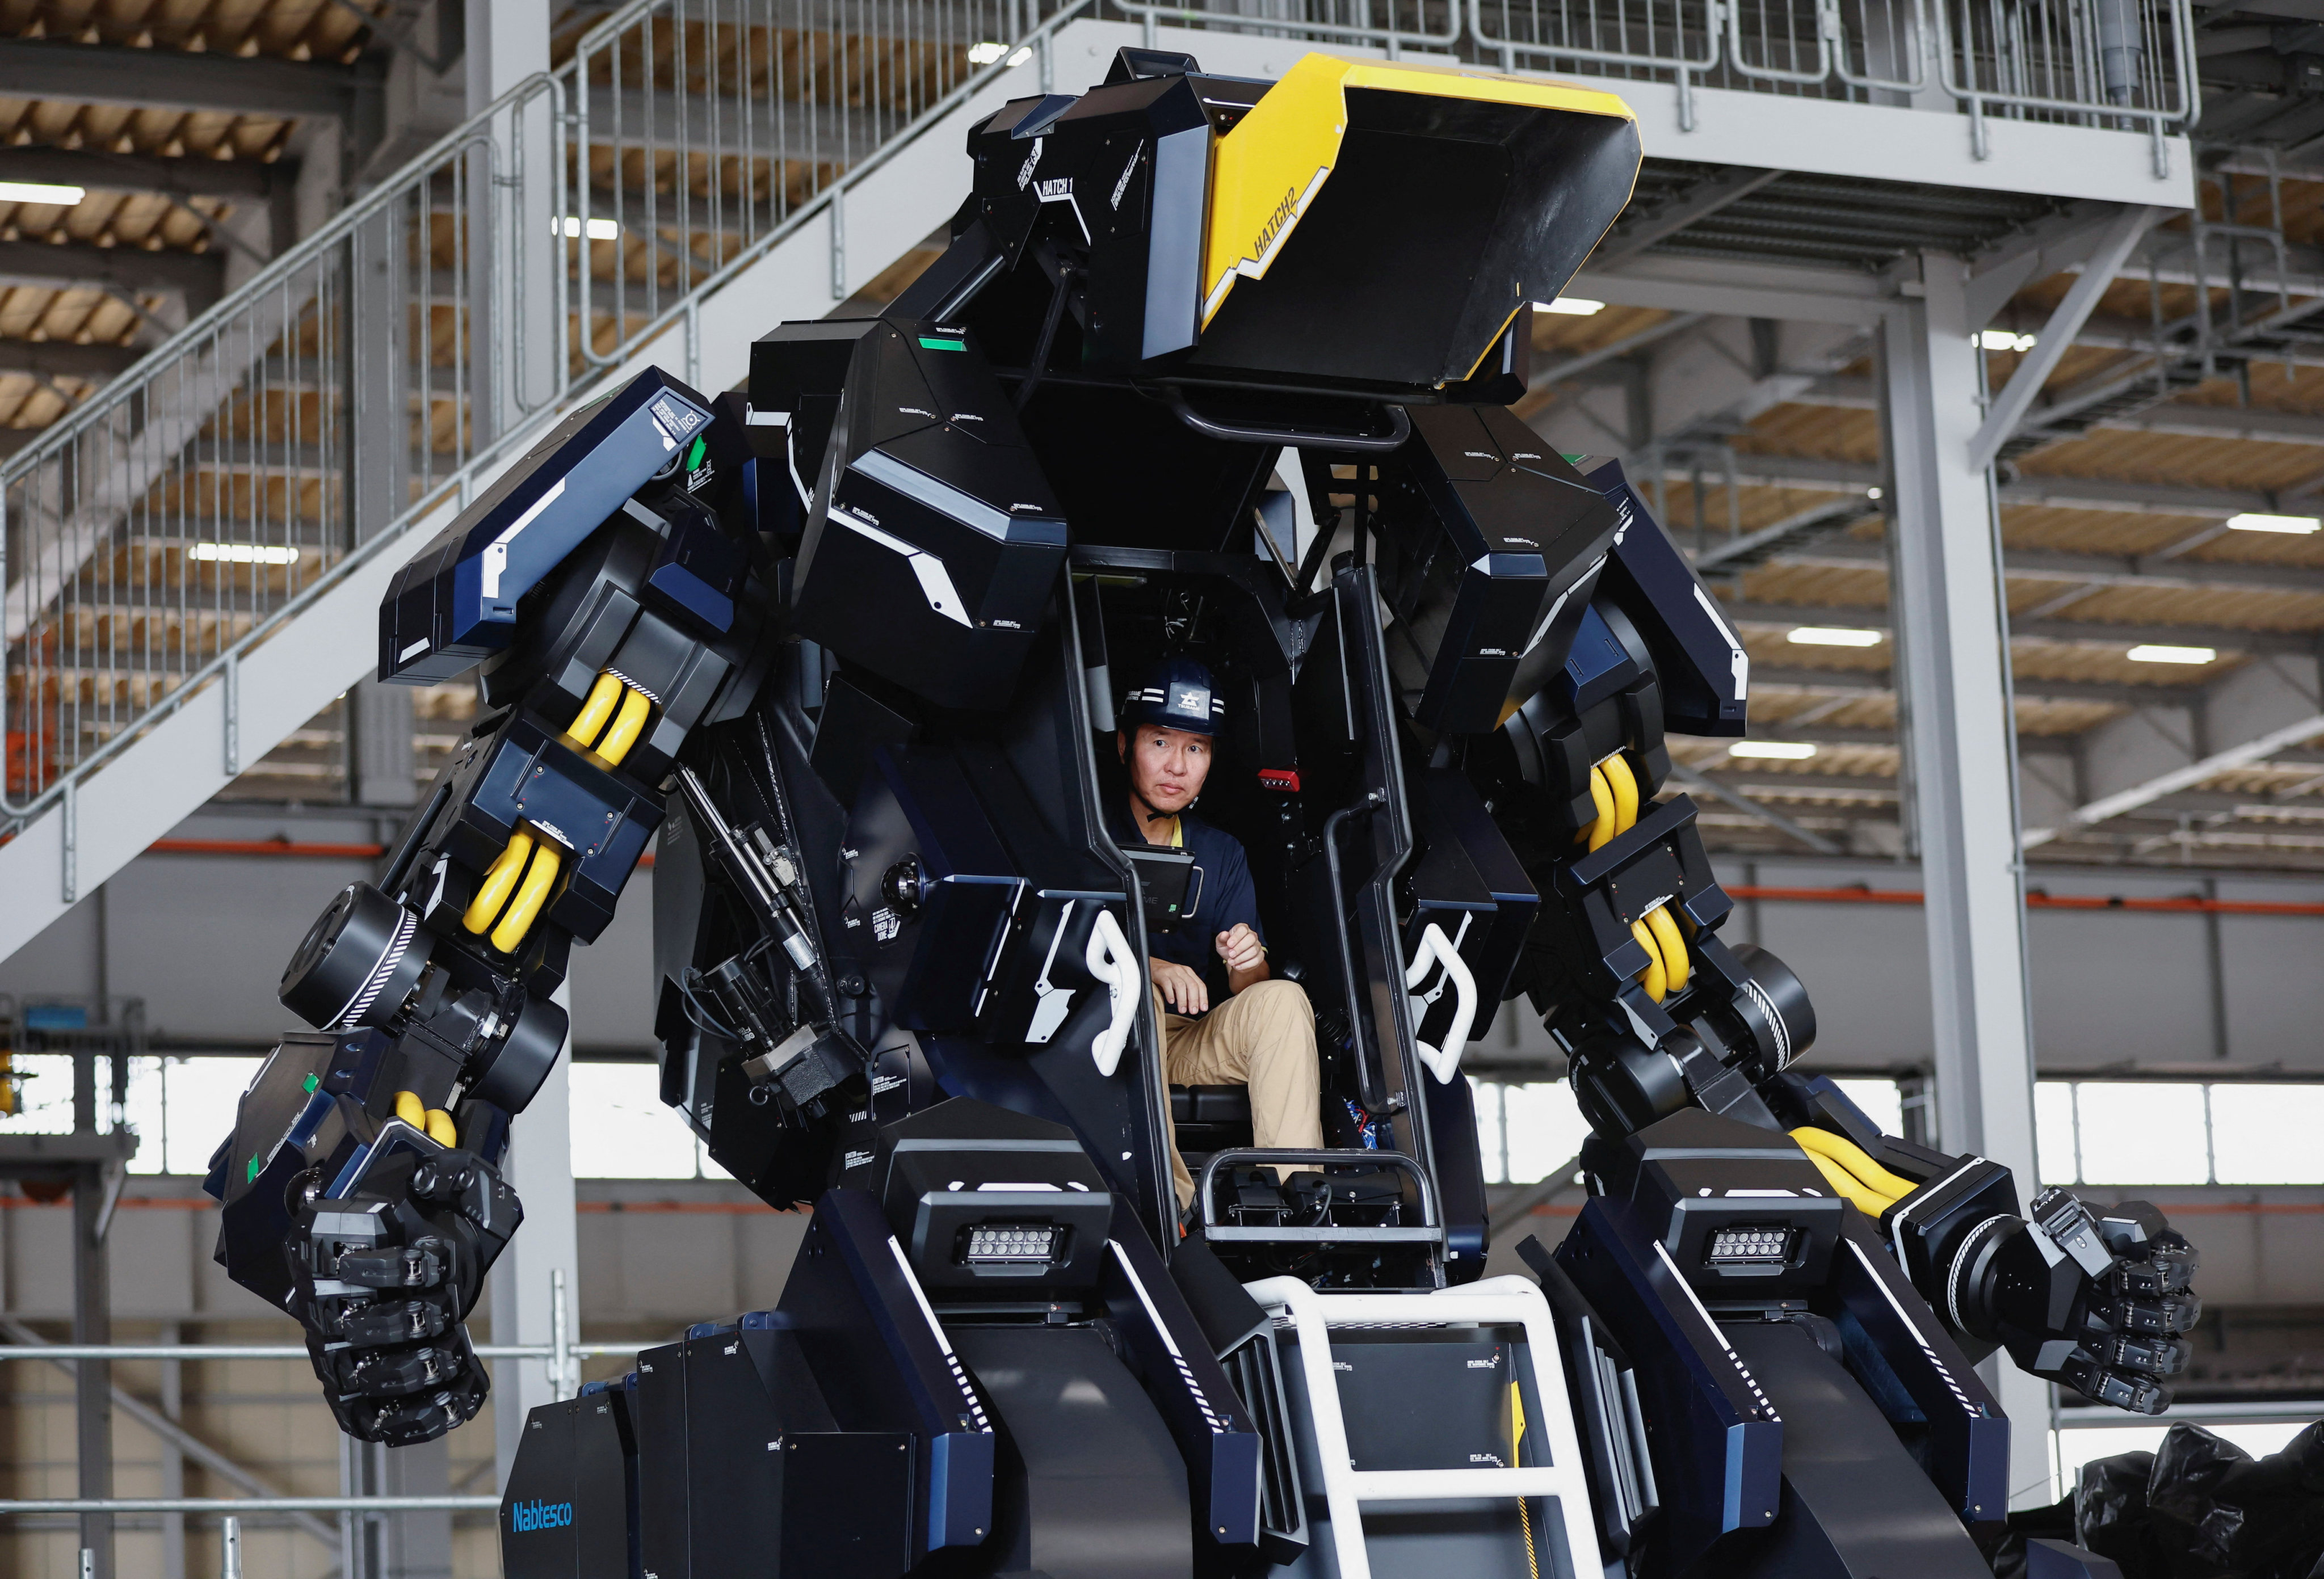 Archax, a giant human-piloted robot developed by Japanese start-up firm Tsubame Industries. Photo: Reuters